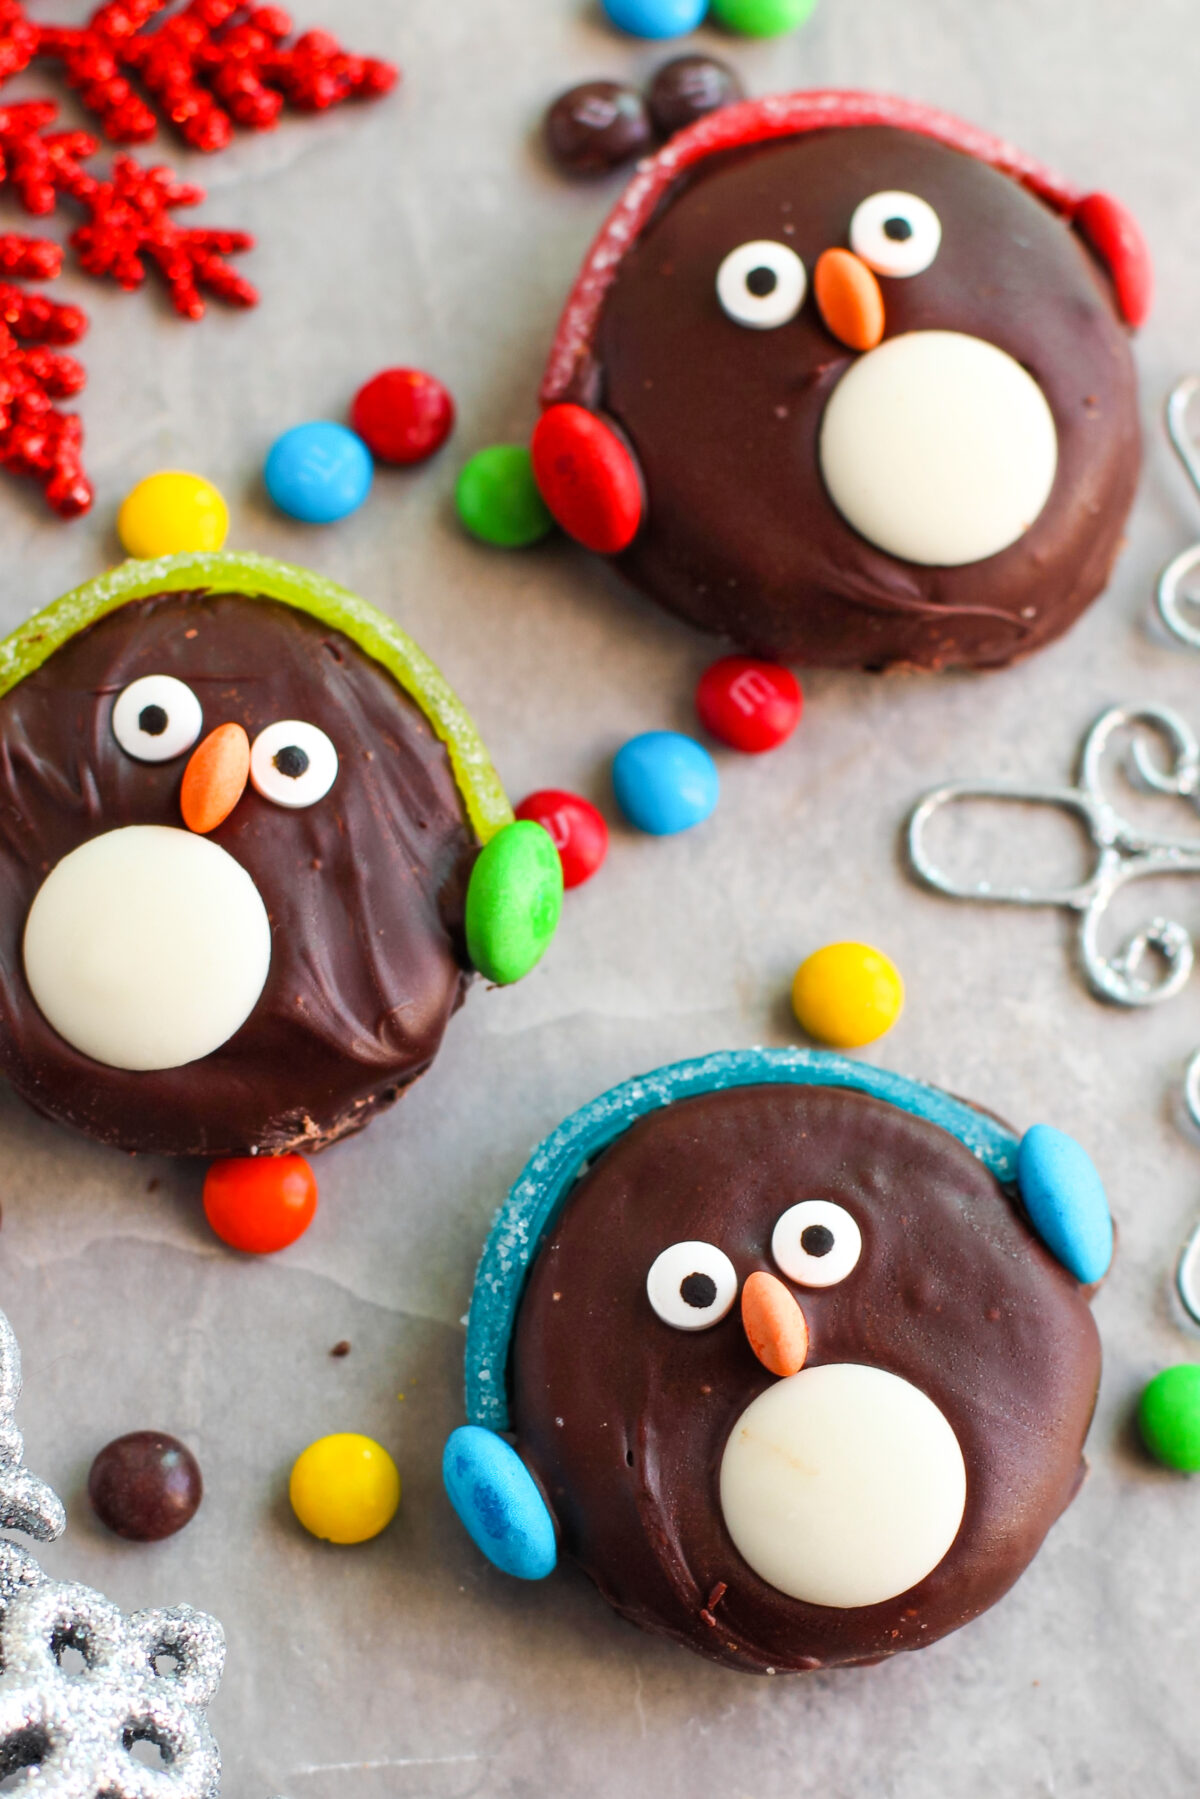 A fun recipe for kids and adults alike, these Oreo penguin cookies are a perfect addition to your holiday cookie platter.